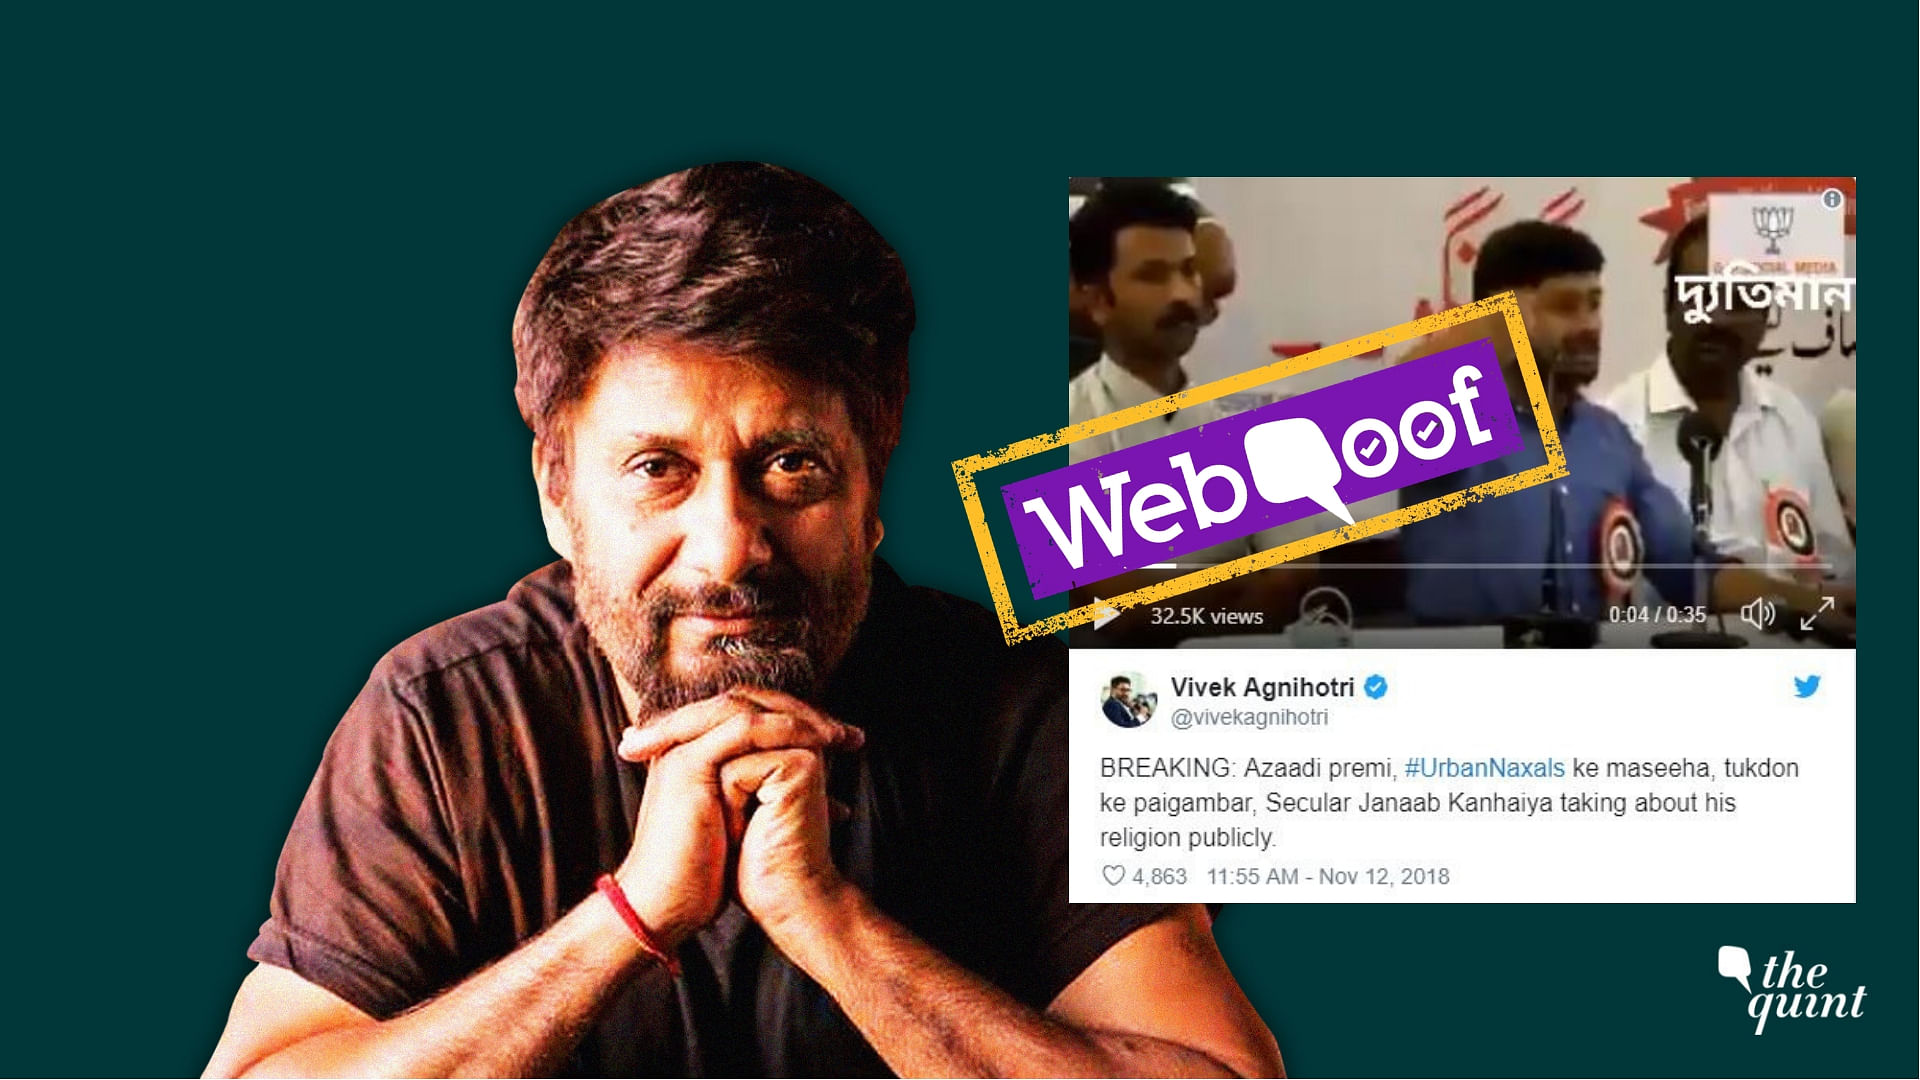  Vivek Agnihotri tweeted a video clip of Kanhaiya on 12 November and said, “The messenger of Urban Naxals and the prophet of partition is talking about his religion publicly.”